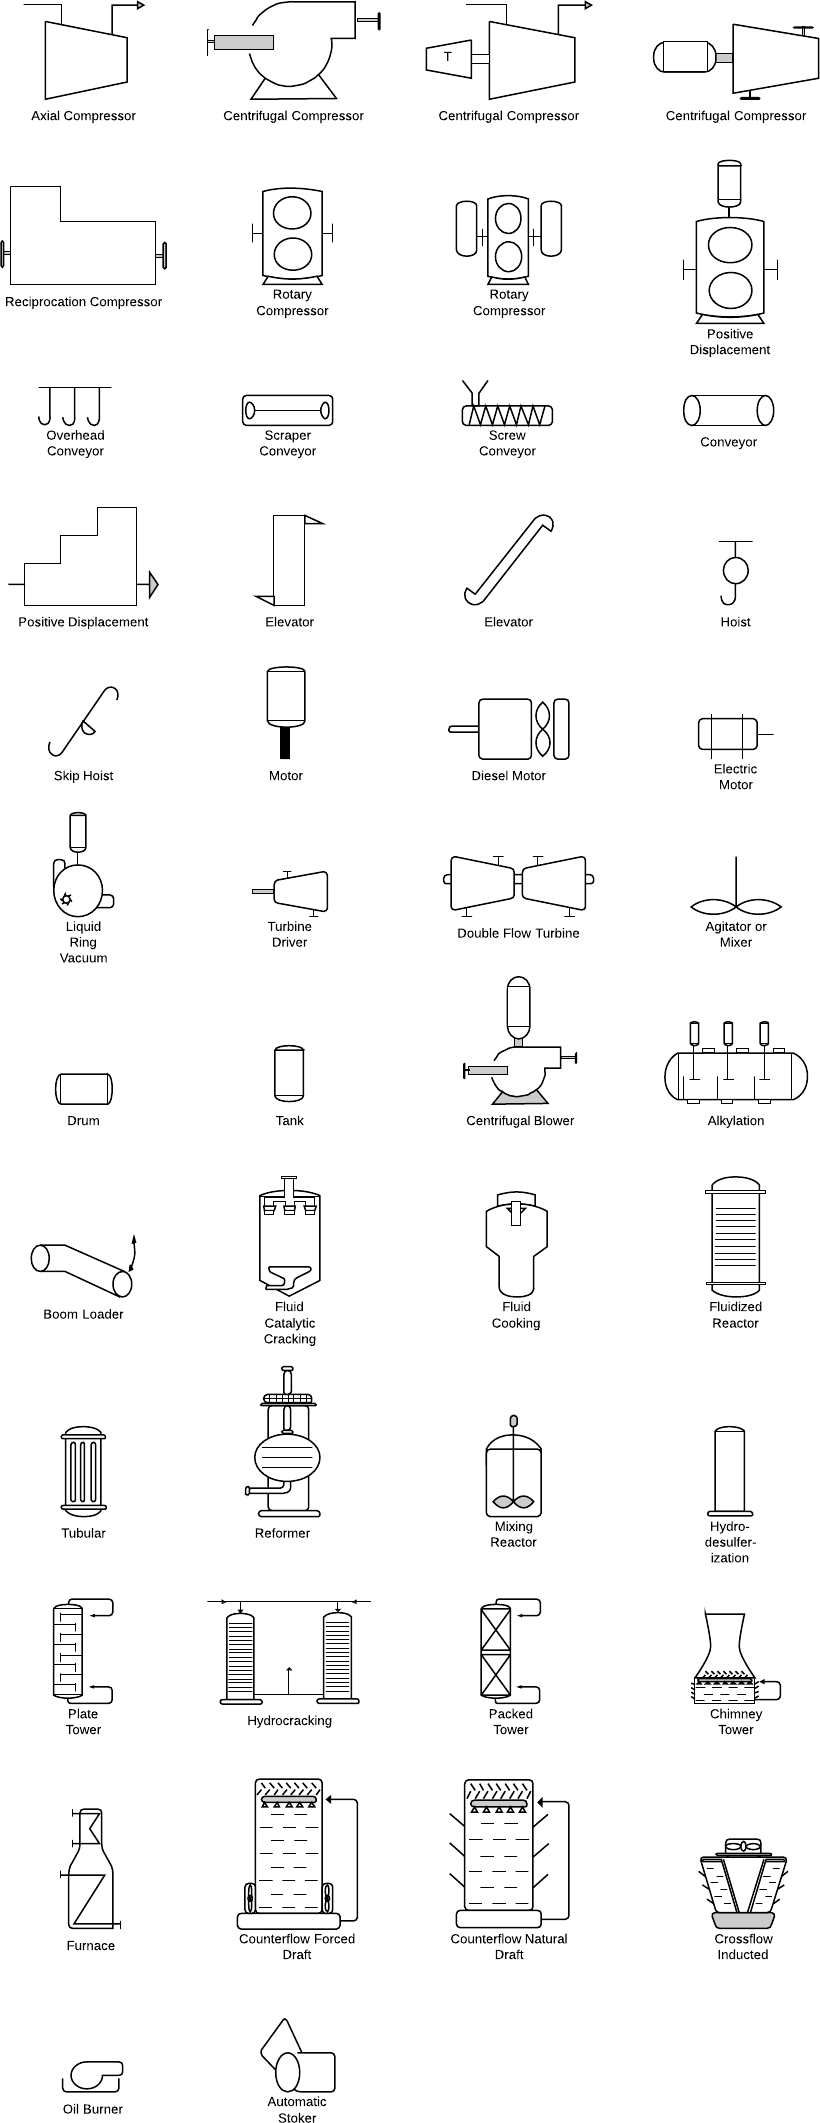 pipe sketch pipeline isometric drawing symbols